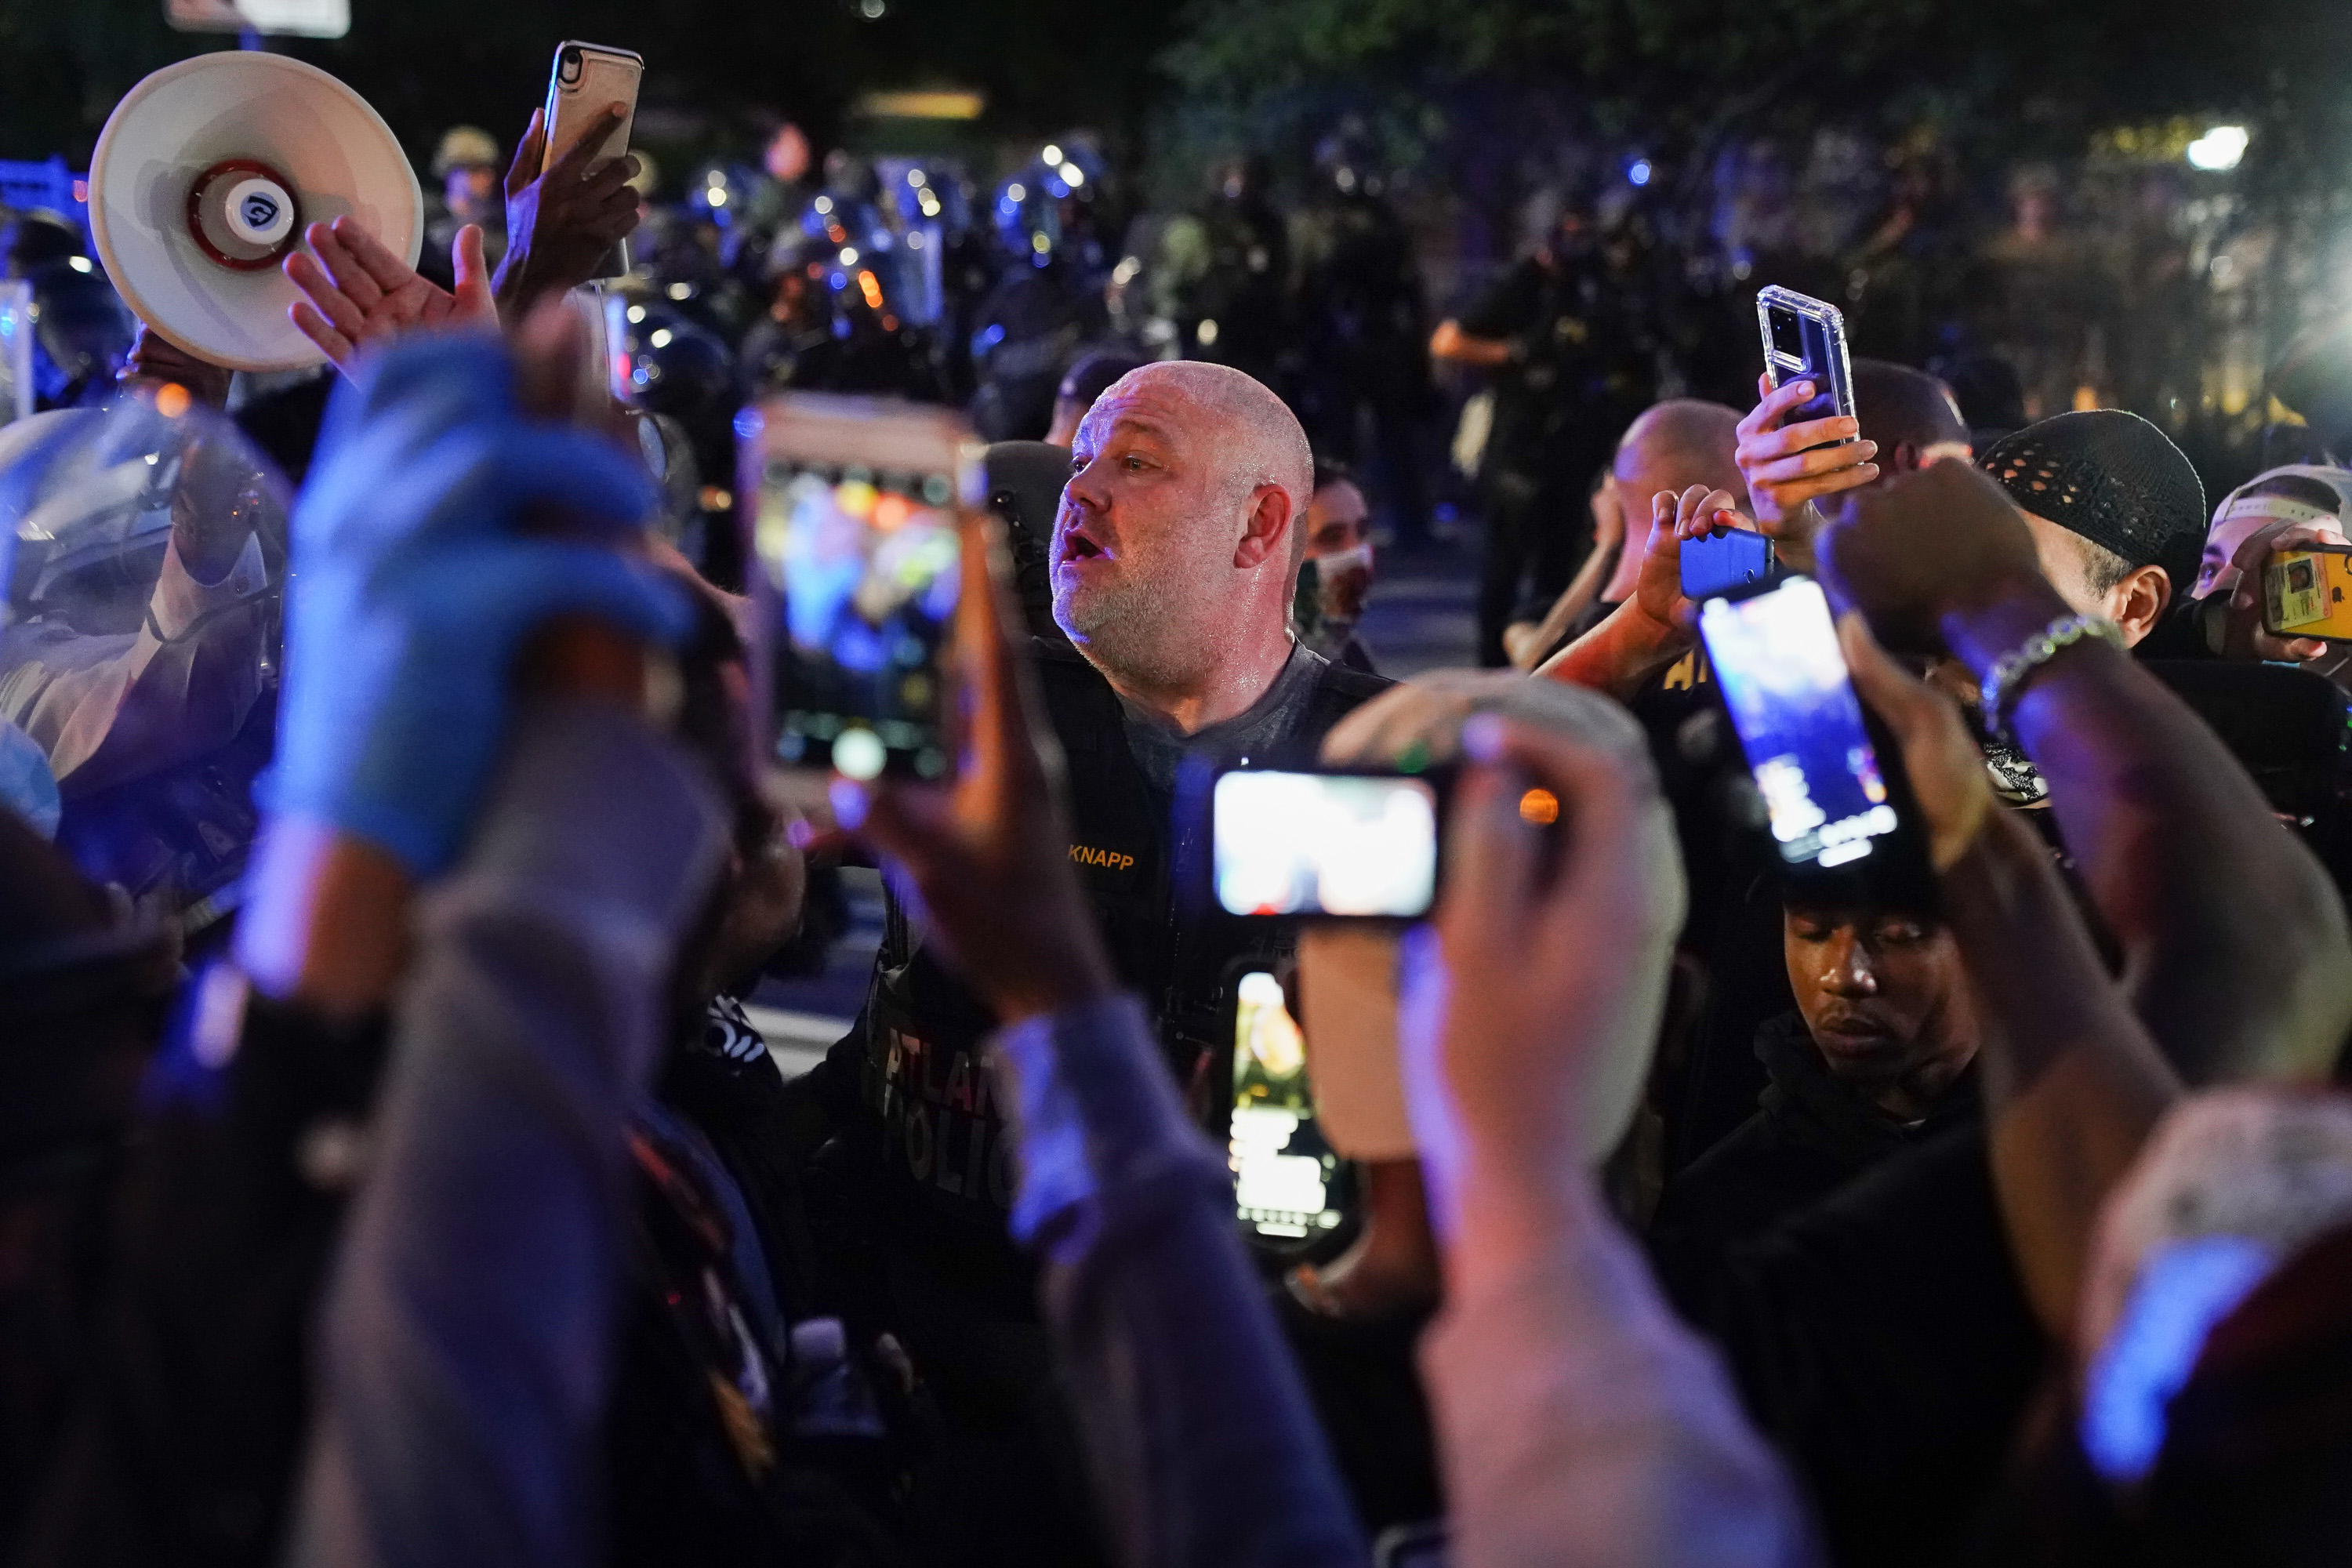 People in a crowd filming at night with cellphone cameras